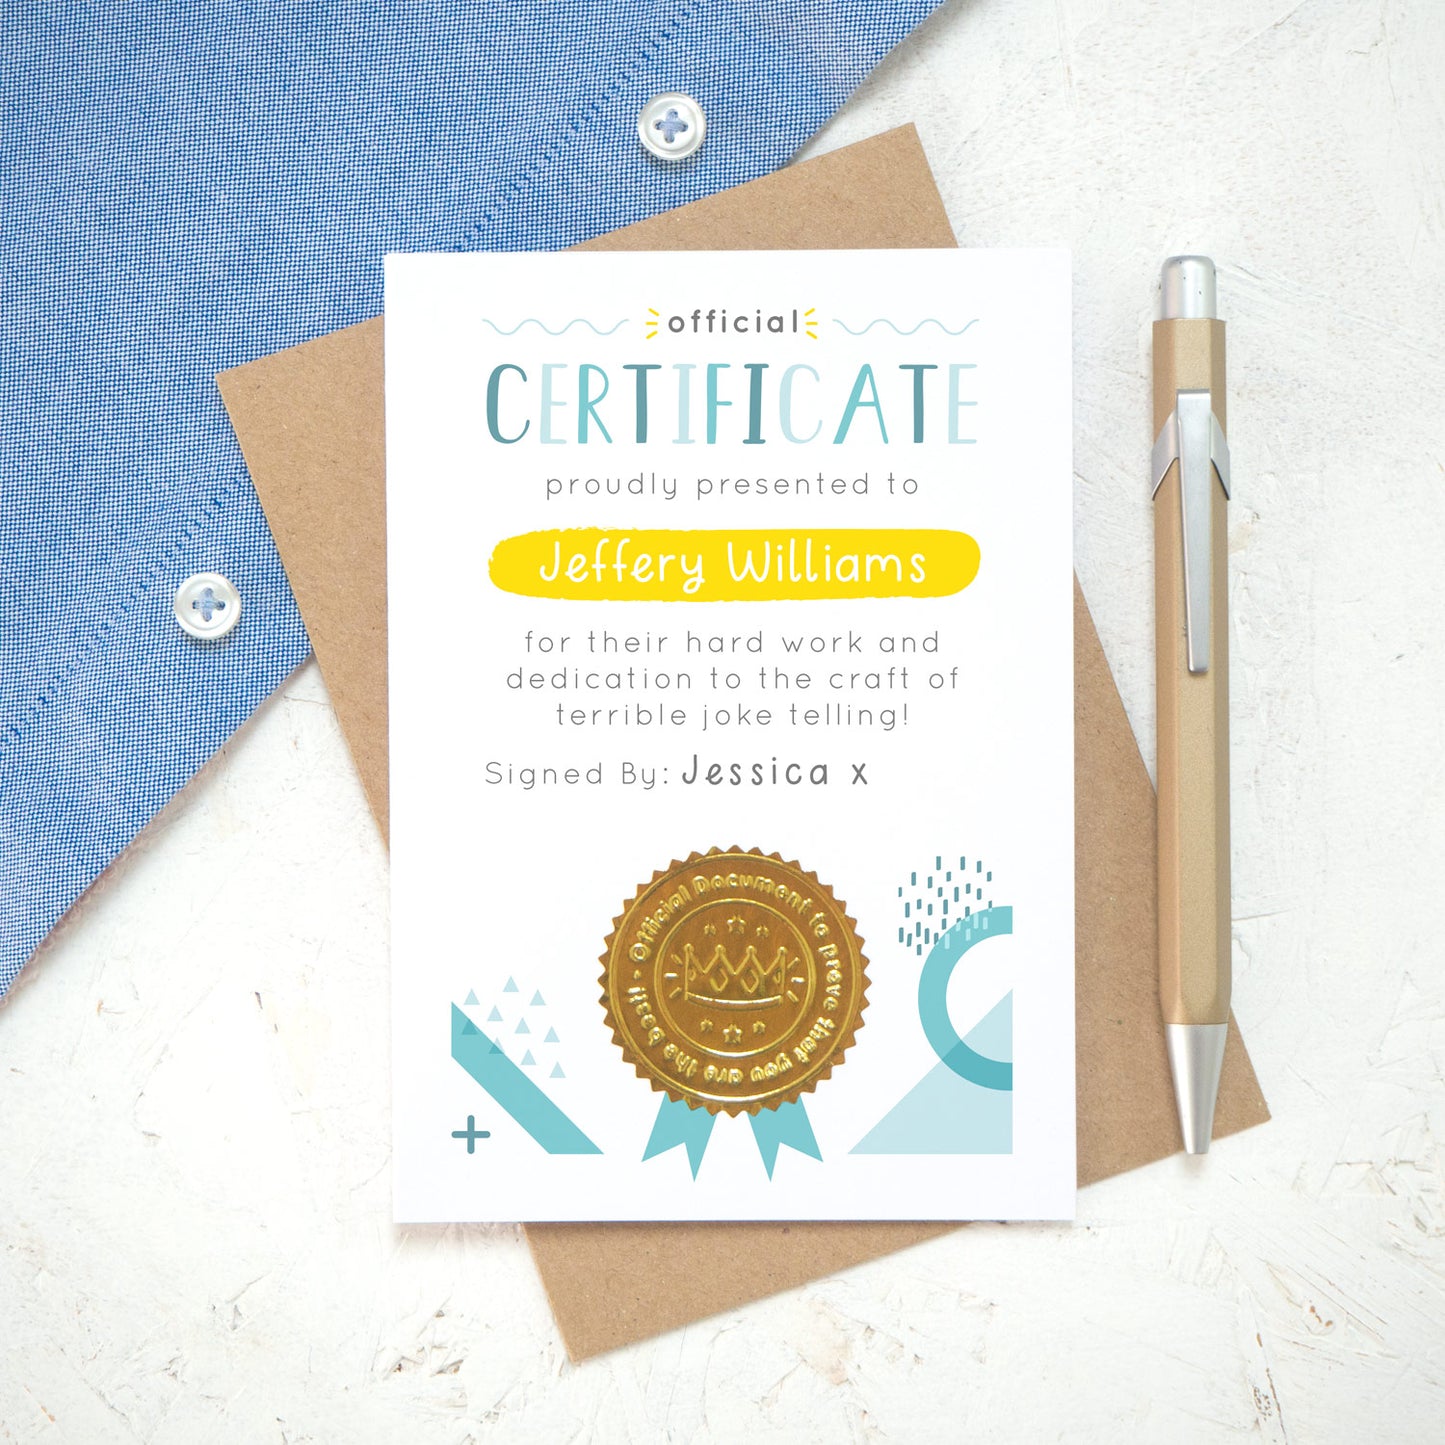 A personalised fathers day certificate printed on white card with varying tones of blue and pops of yellow and gold. Each certificate has a shiny gold seal and space to sign your name. Photographed on a white background with a blue shirt.